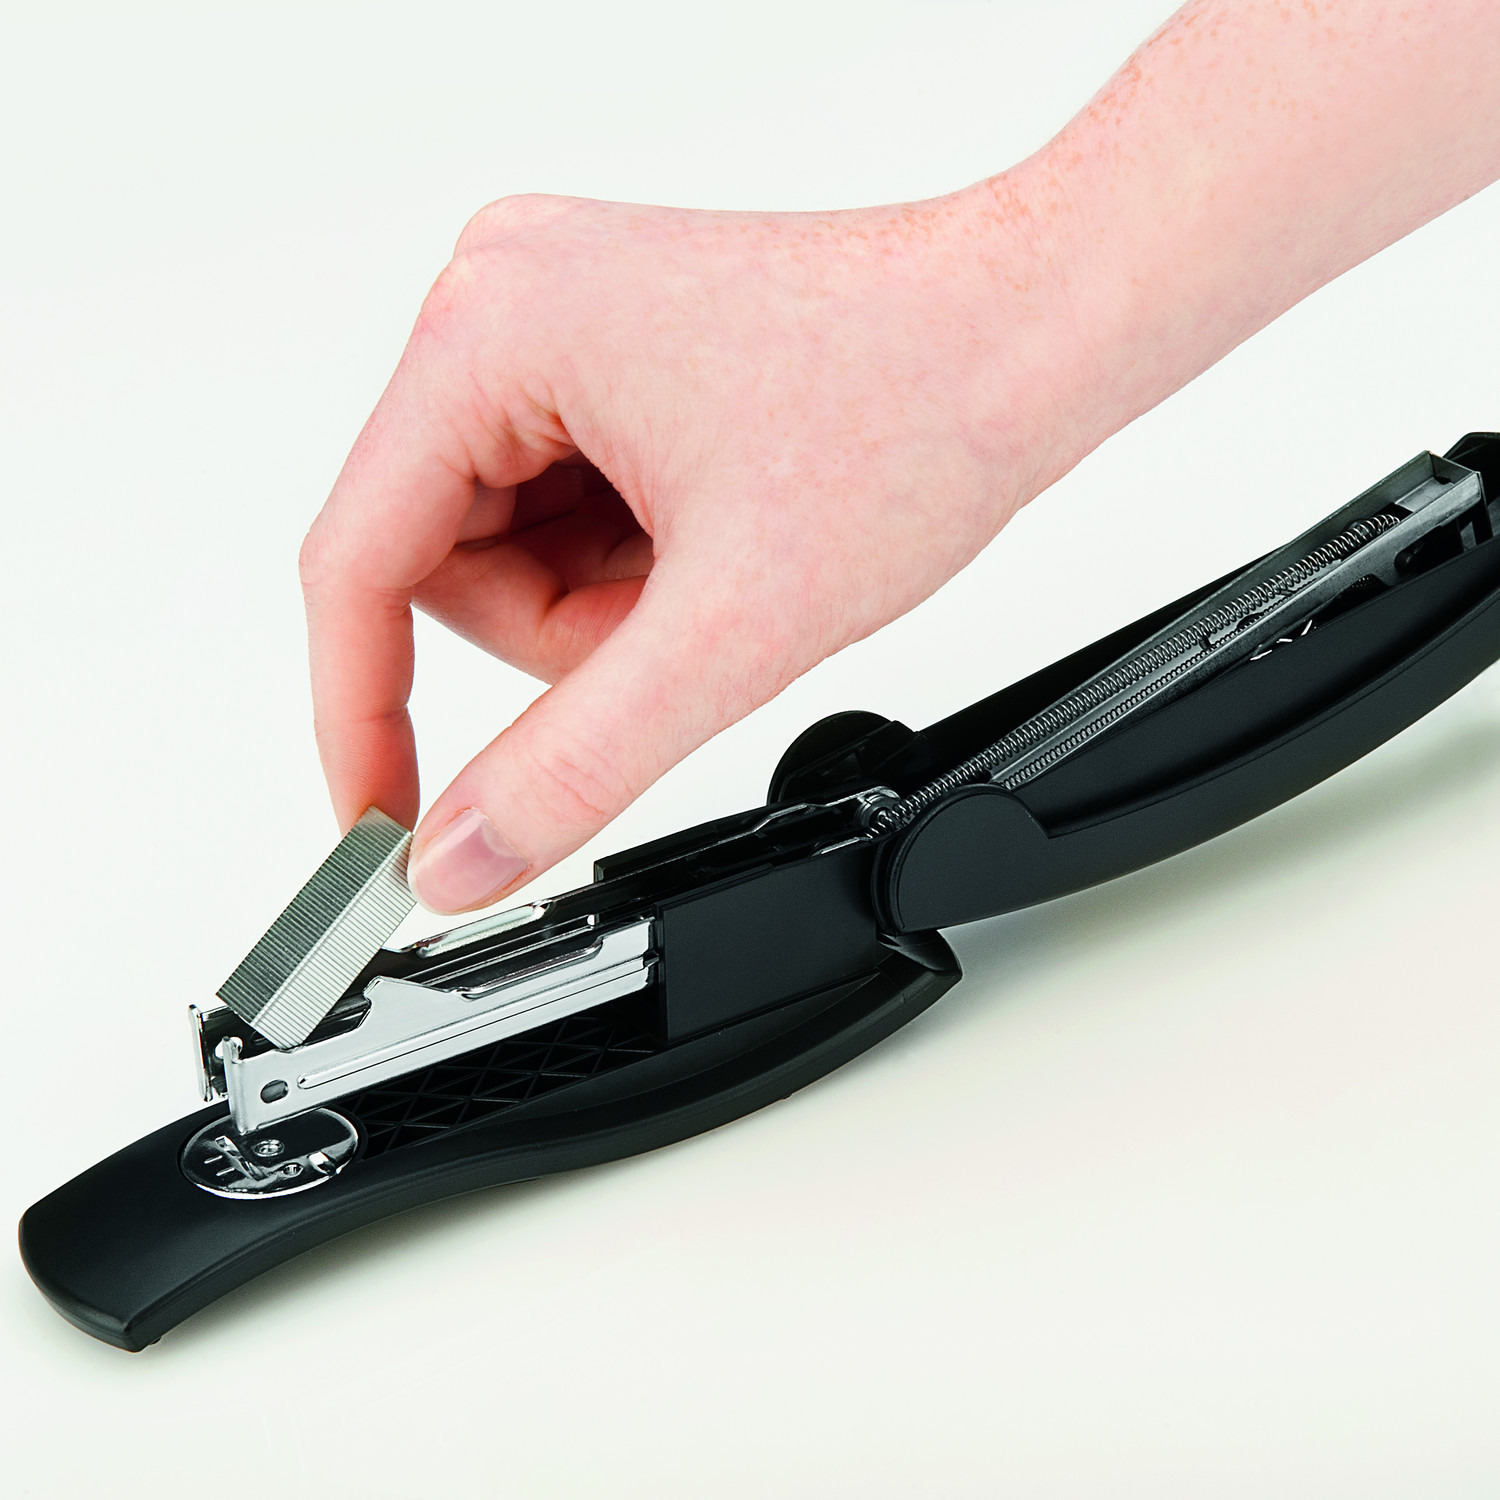 After tipping up the top of the stapler the staples can be inserted into the magazine.